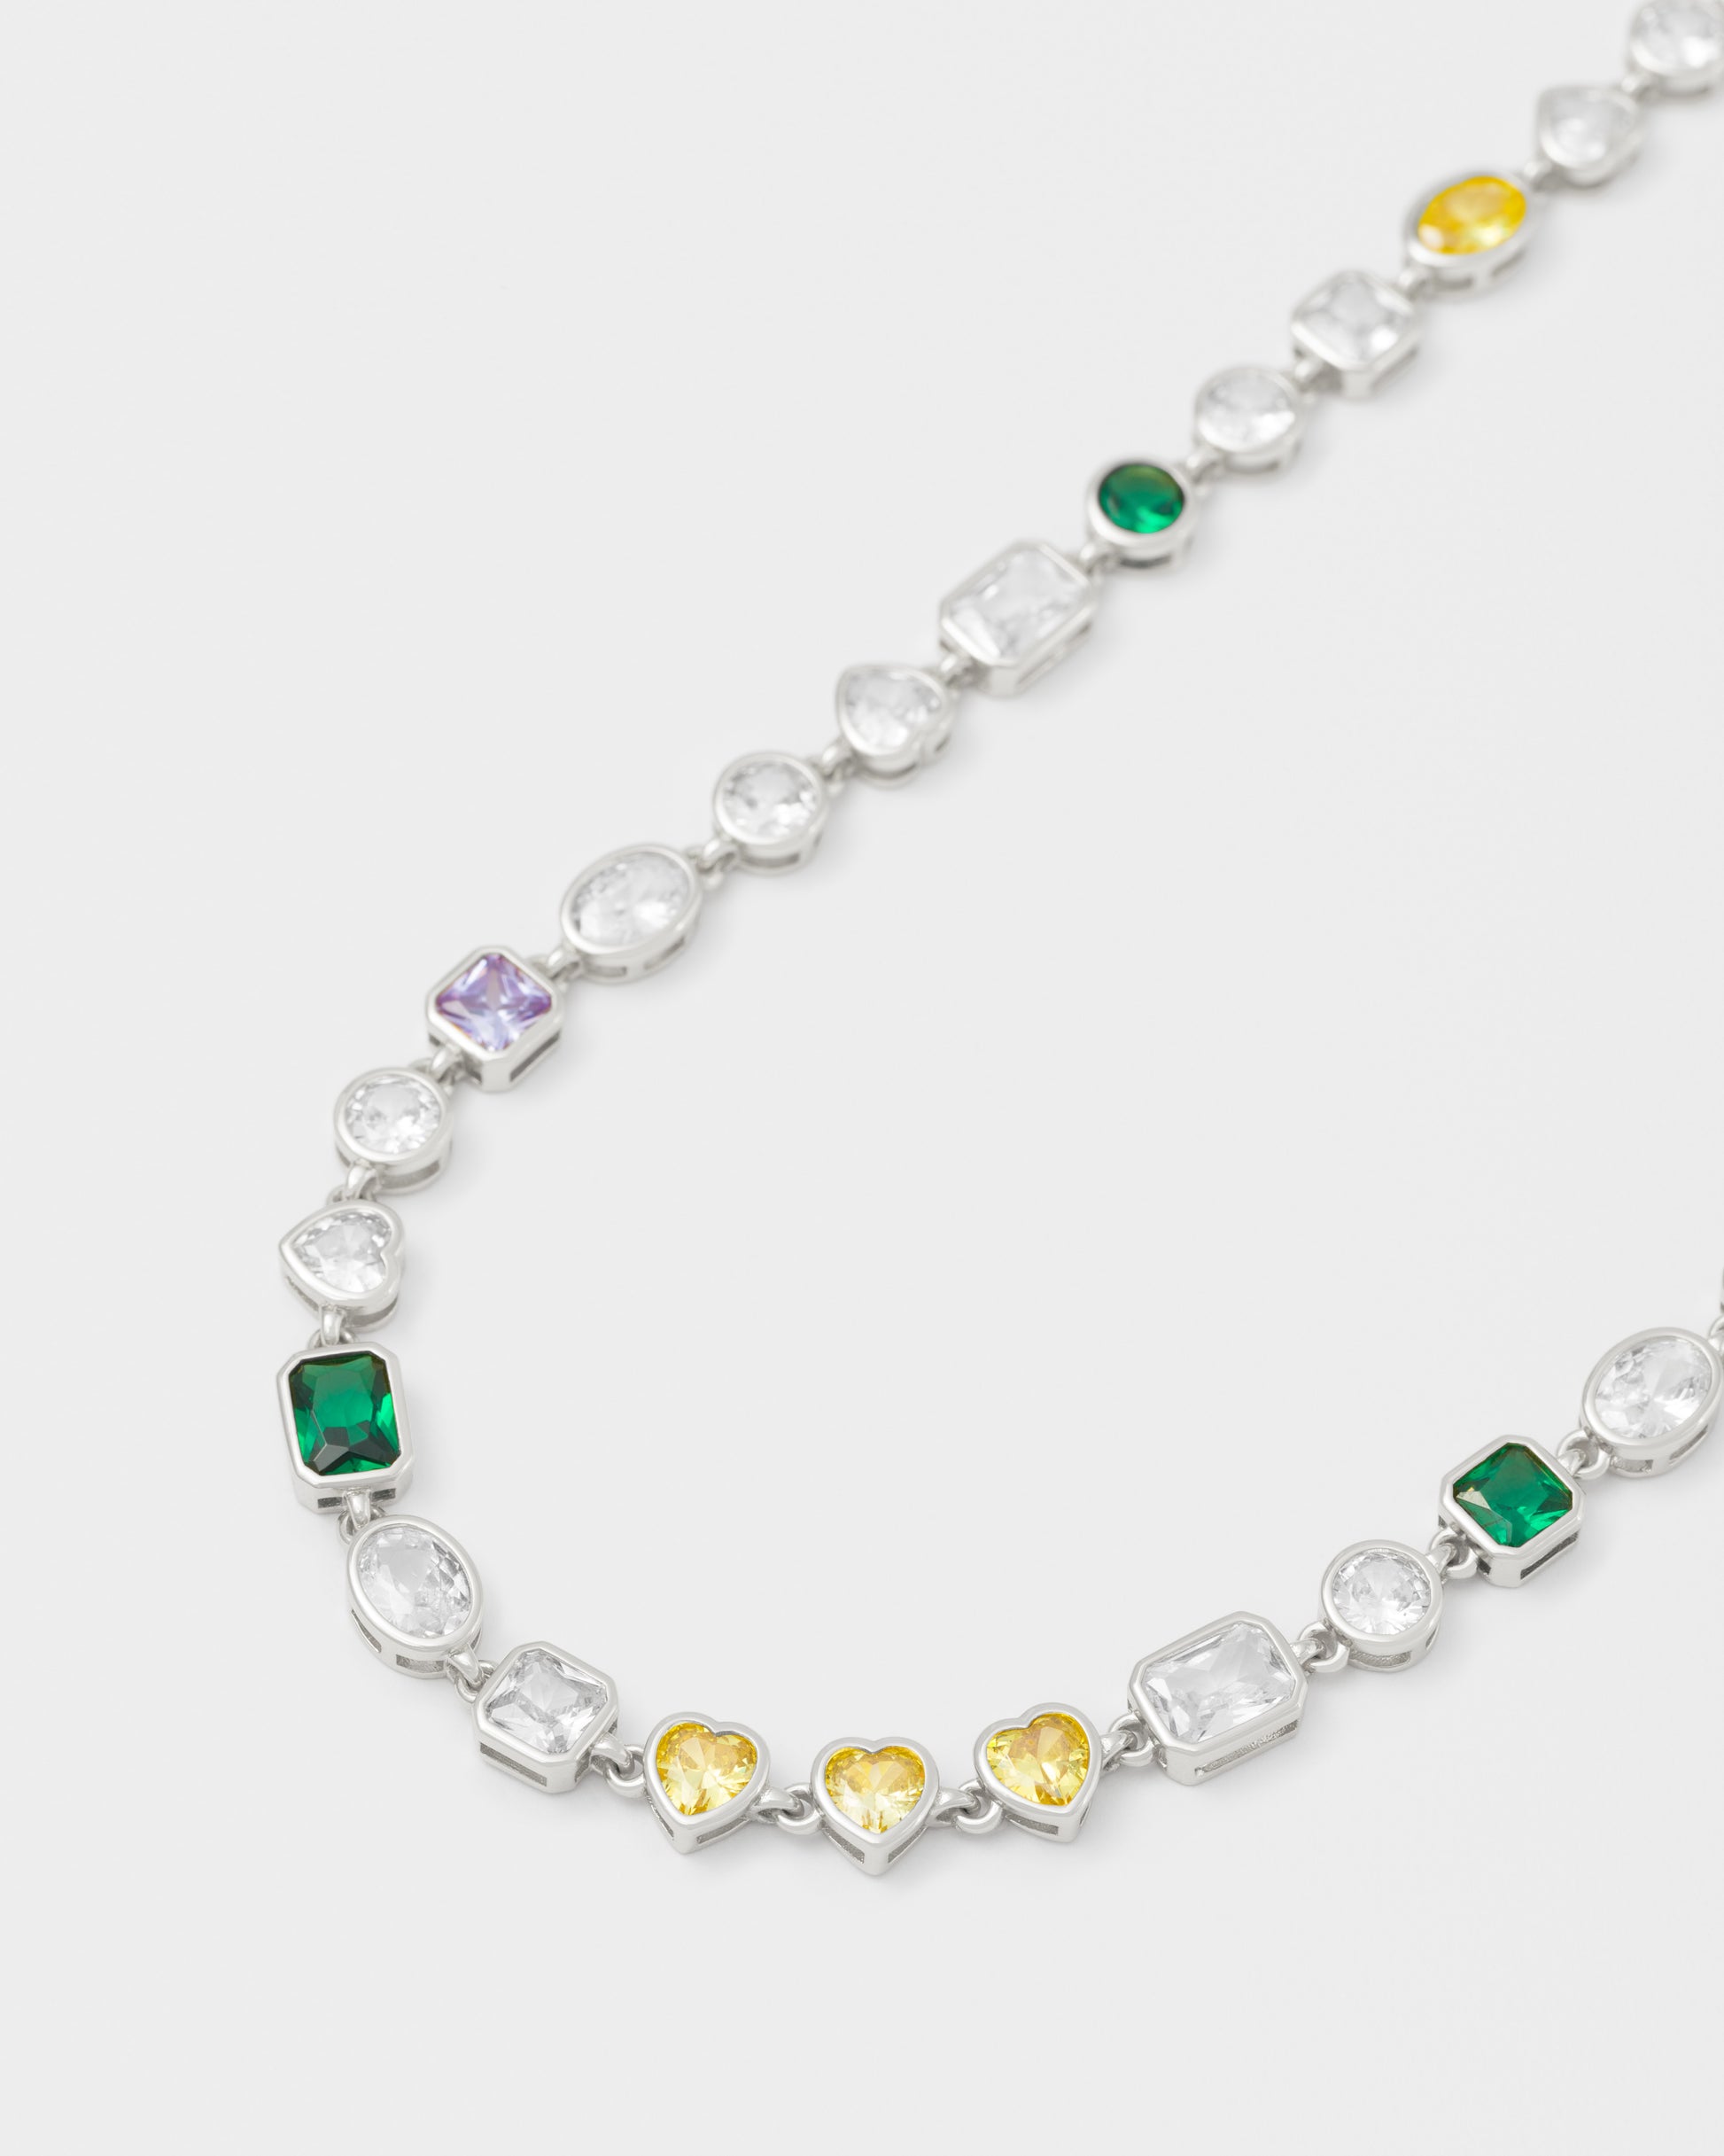 detail of mixed bezels chain necklace with 18kt white gold coating and hand-set stones of irregular shapes and colors. Ensemble of rectangular, square, round and heart-shaped stones in diamond white, amethyst, lilac, emerald green and gold yellow. Invisible closure with logo.